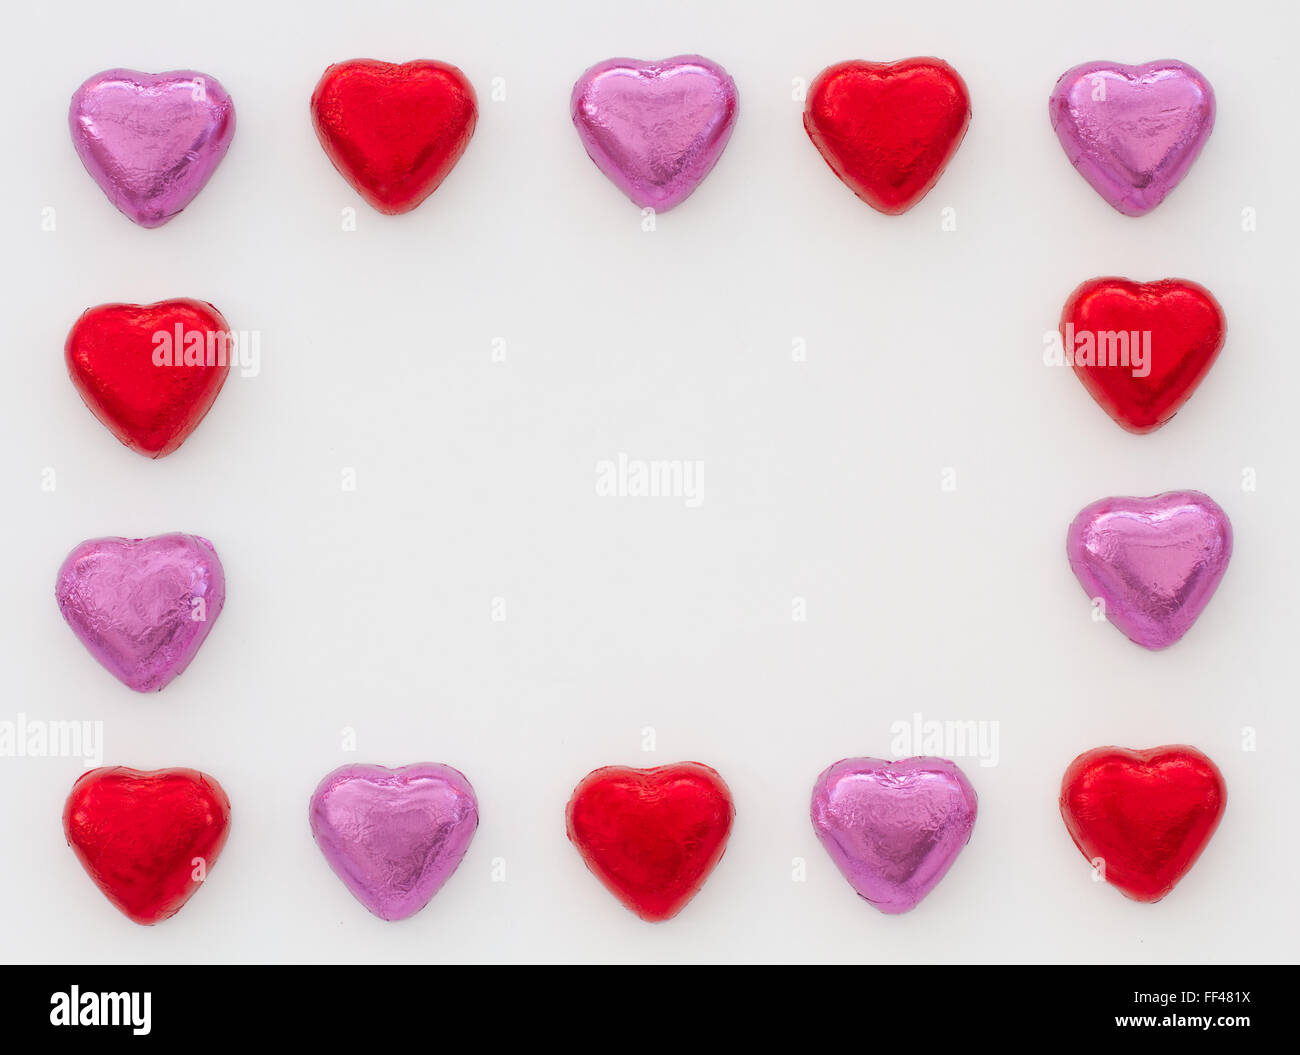 Chocolate heart shapes making a frame around the edge of an image on an isolated white background. Heart shaped candy frame. Stock Photo